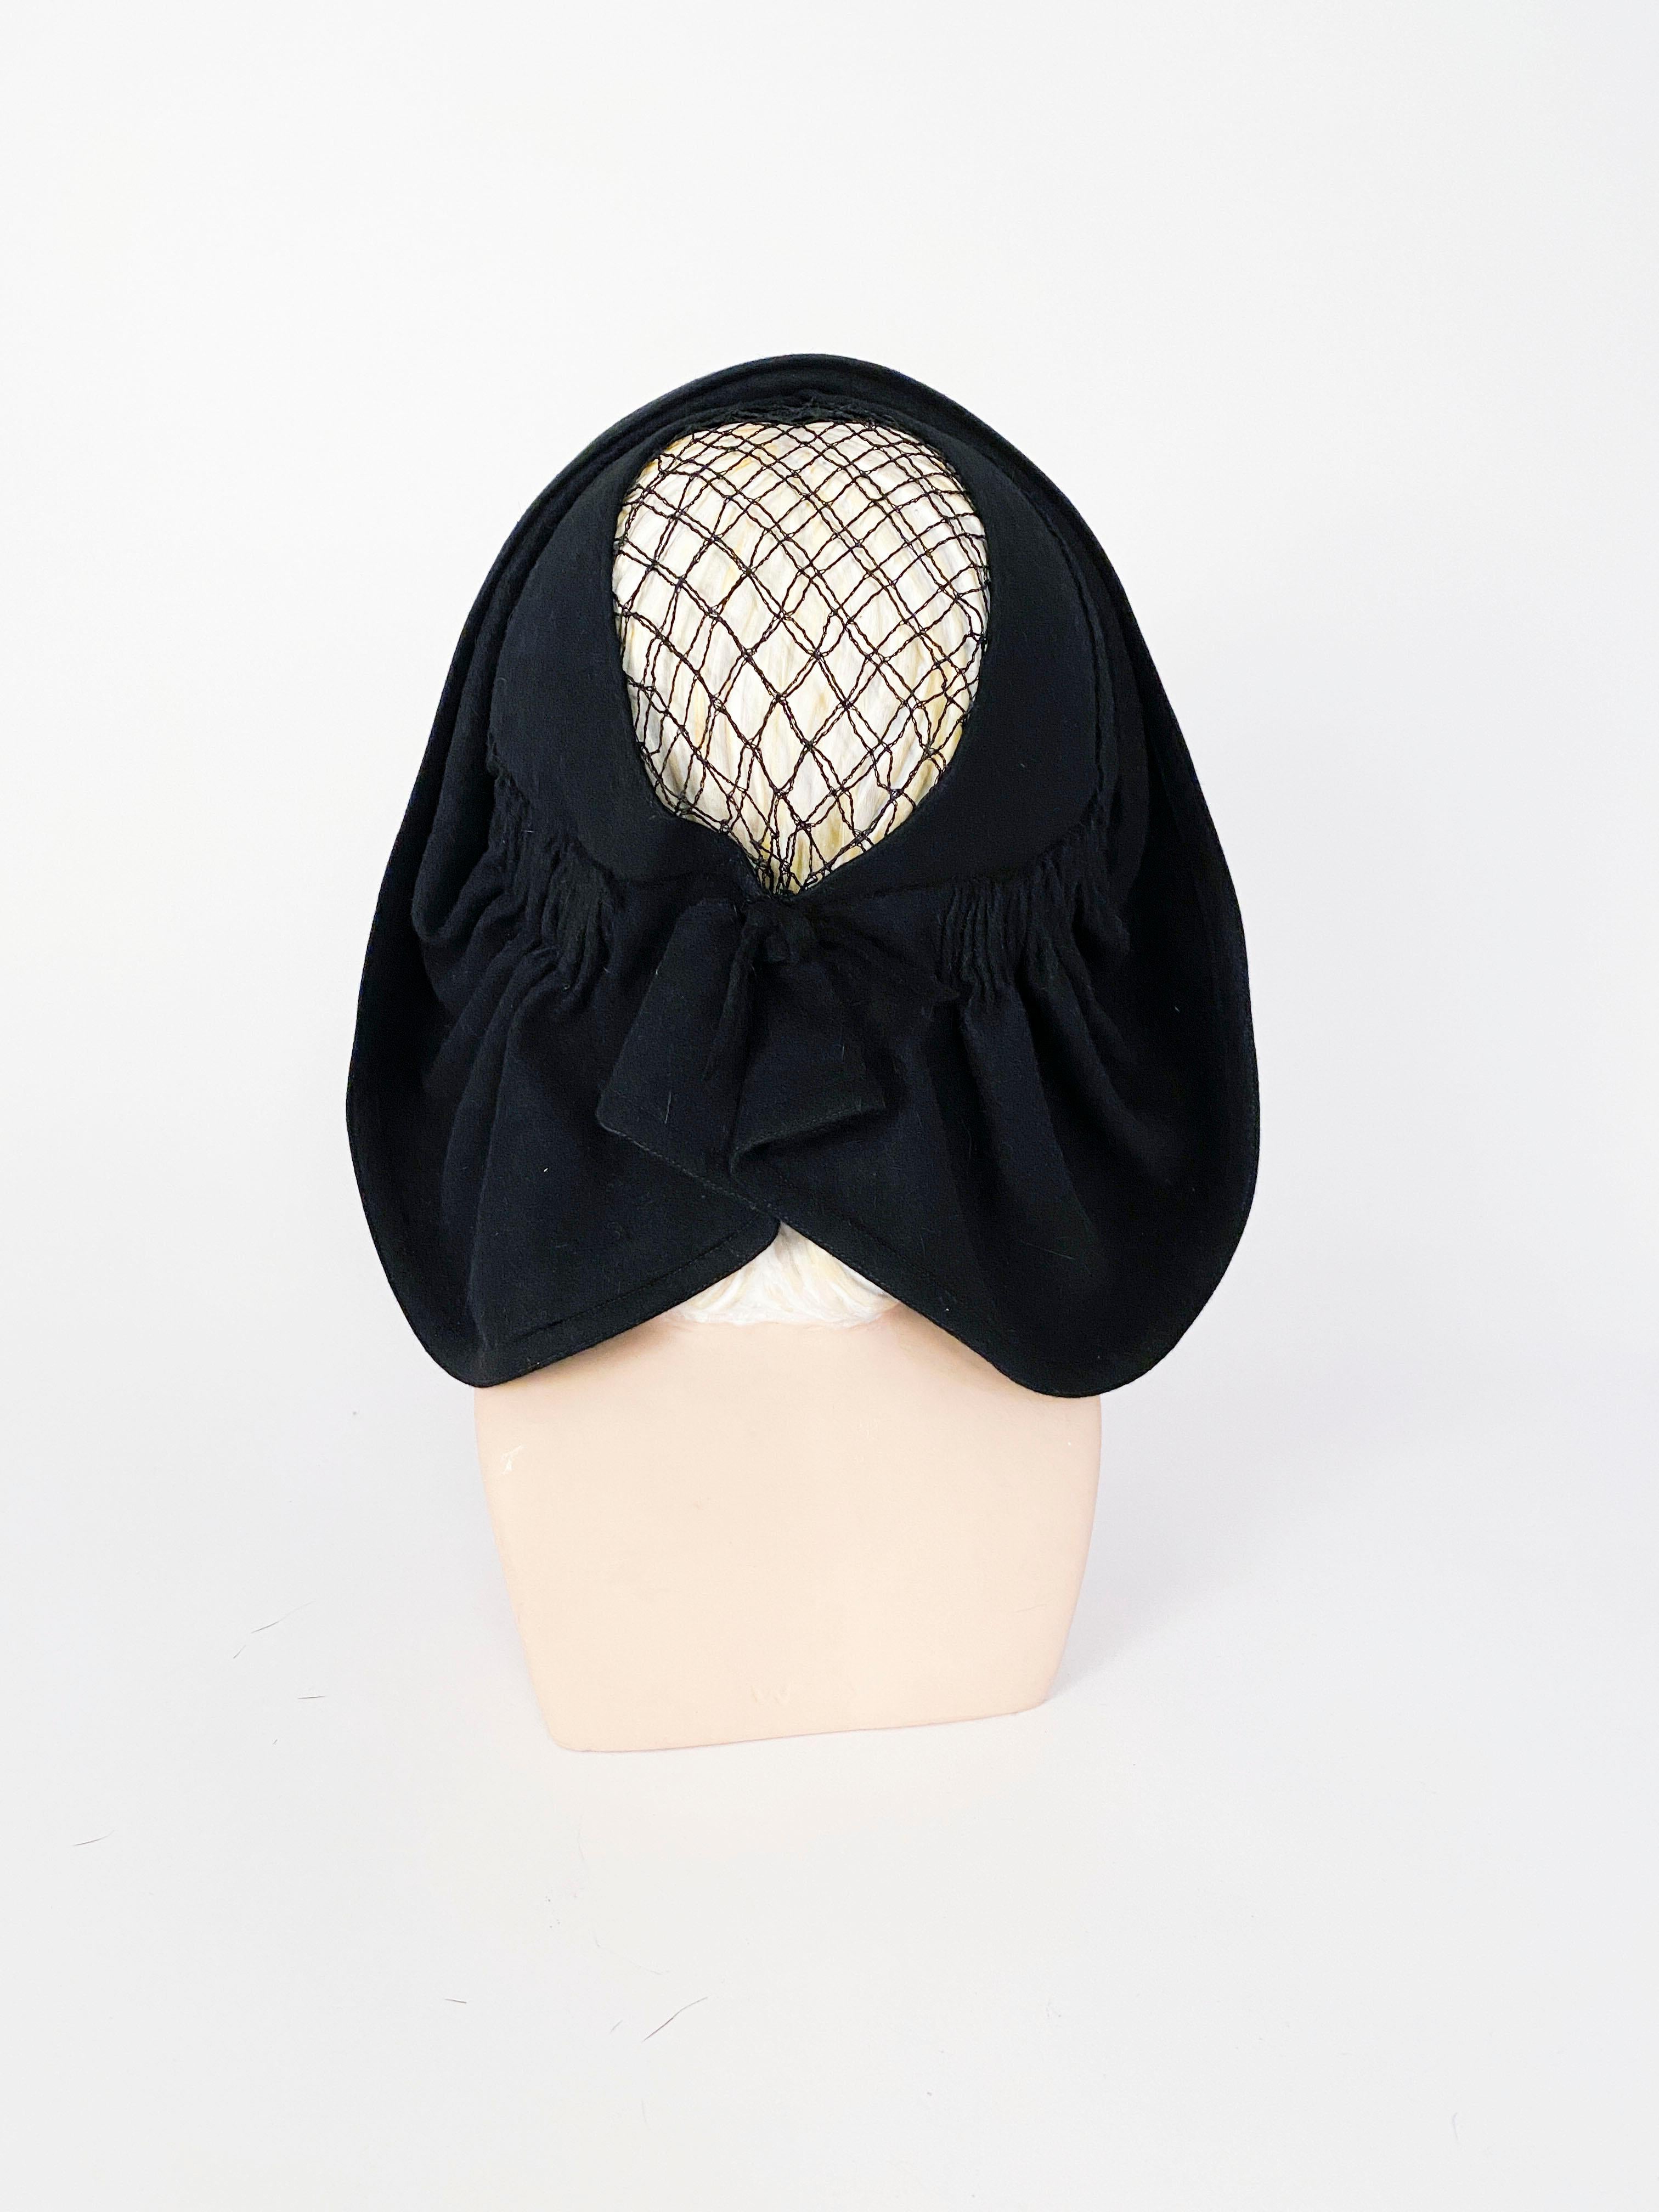 Women's 1930s Black Felt Hat with Netting and Back Details